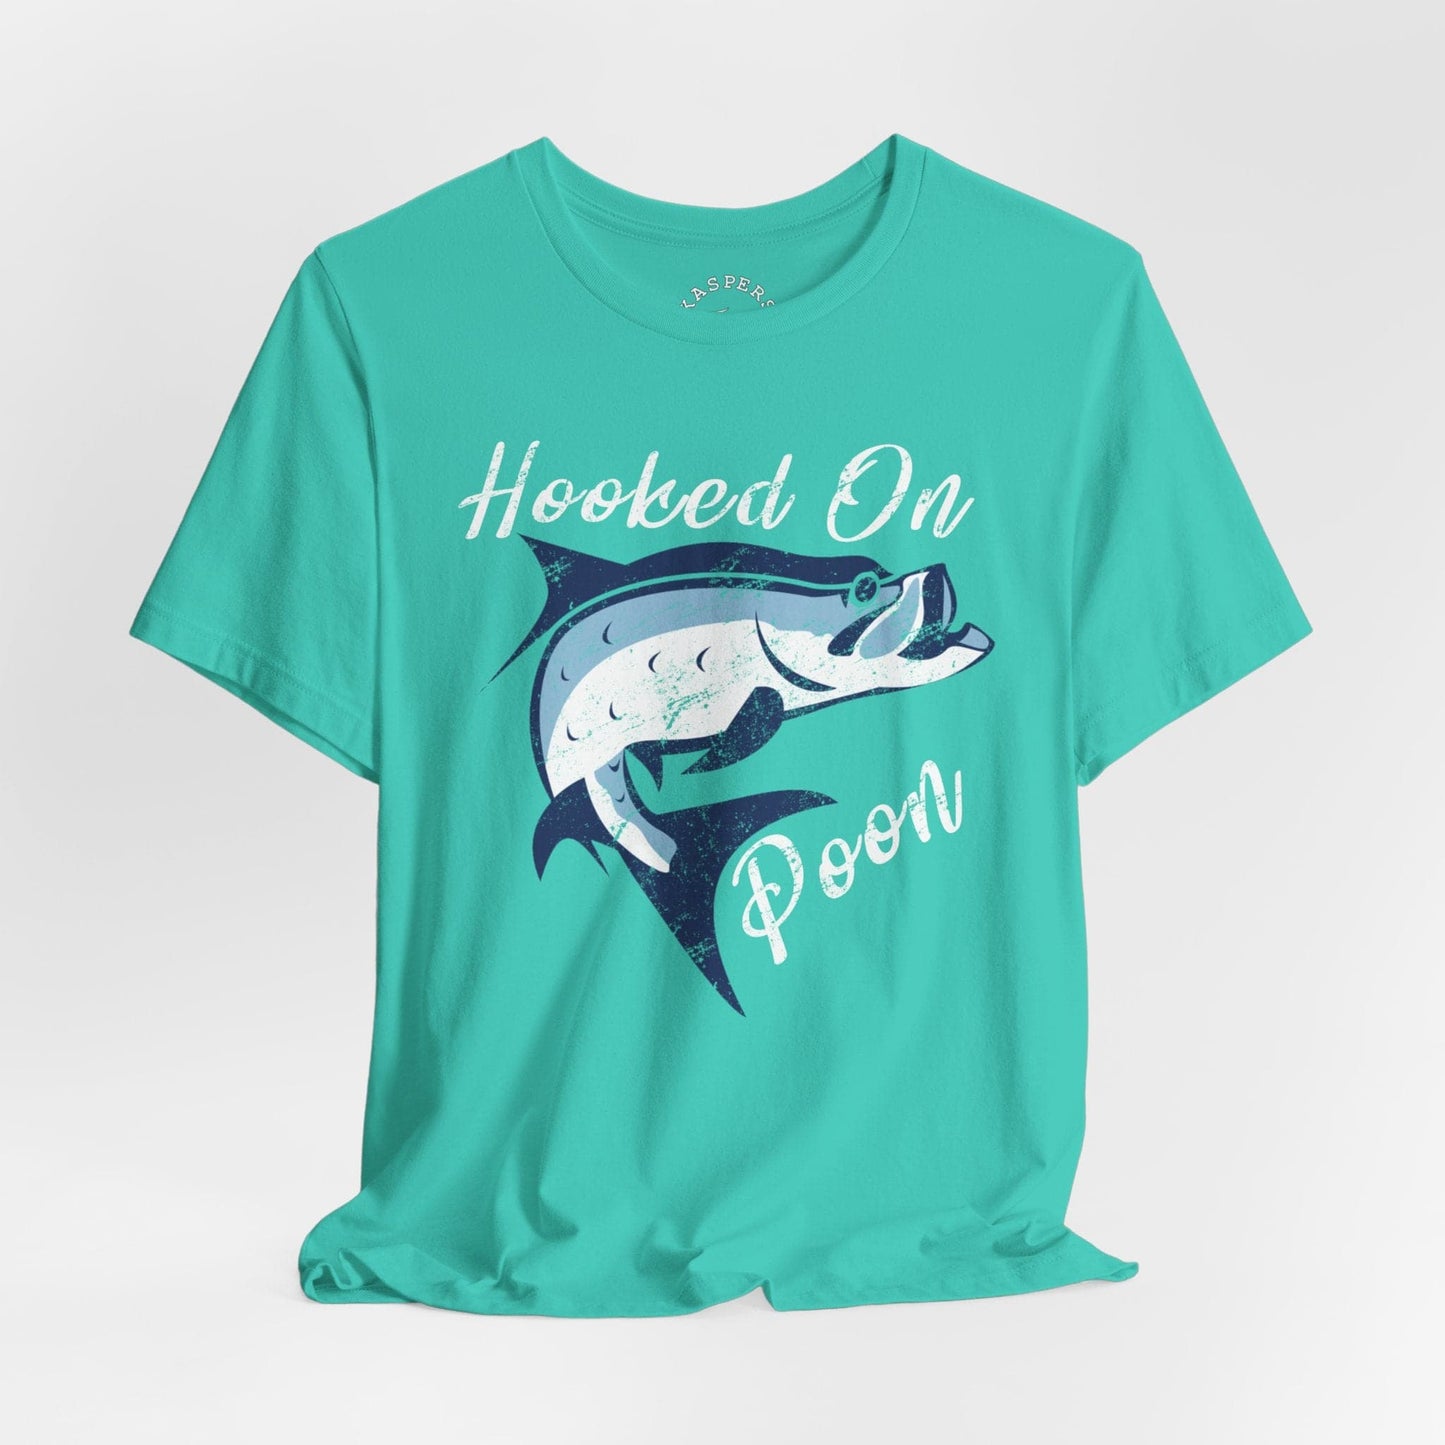 Hooked on Poon T-Shirt